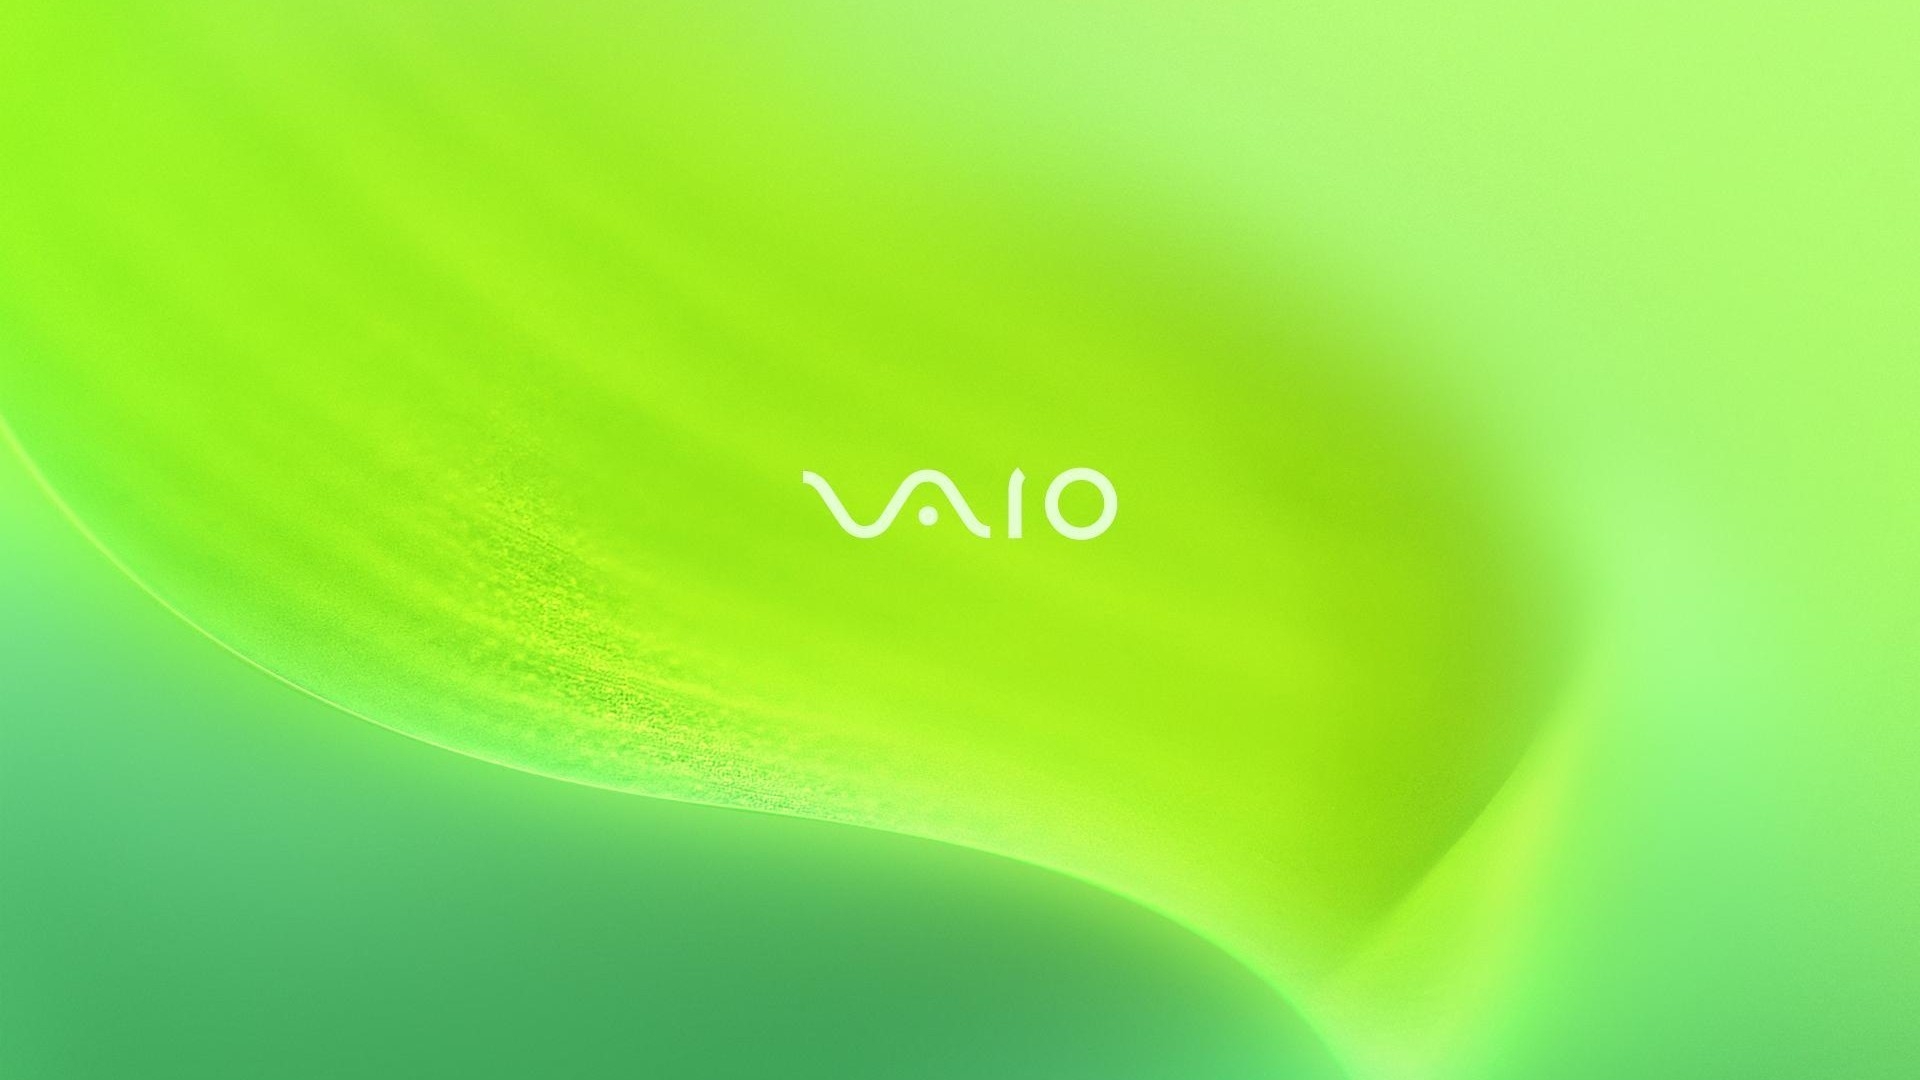 Cool Sony Vaio for 1920 x 1080 HDTV 1080p resolution